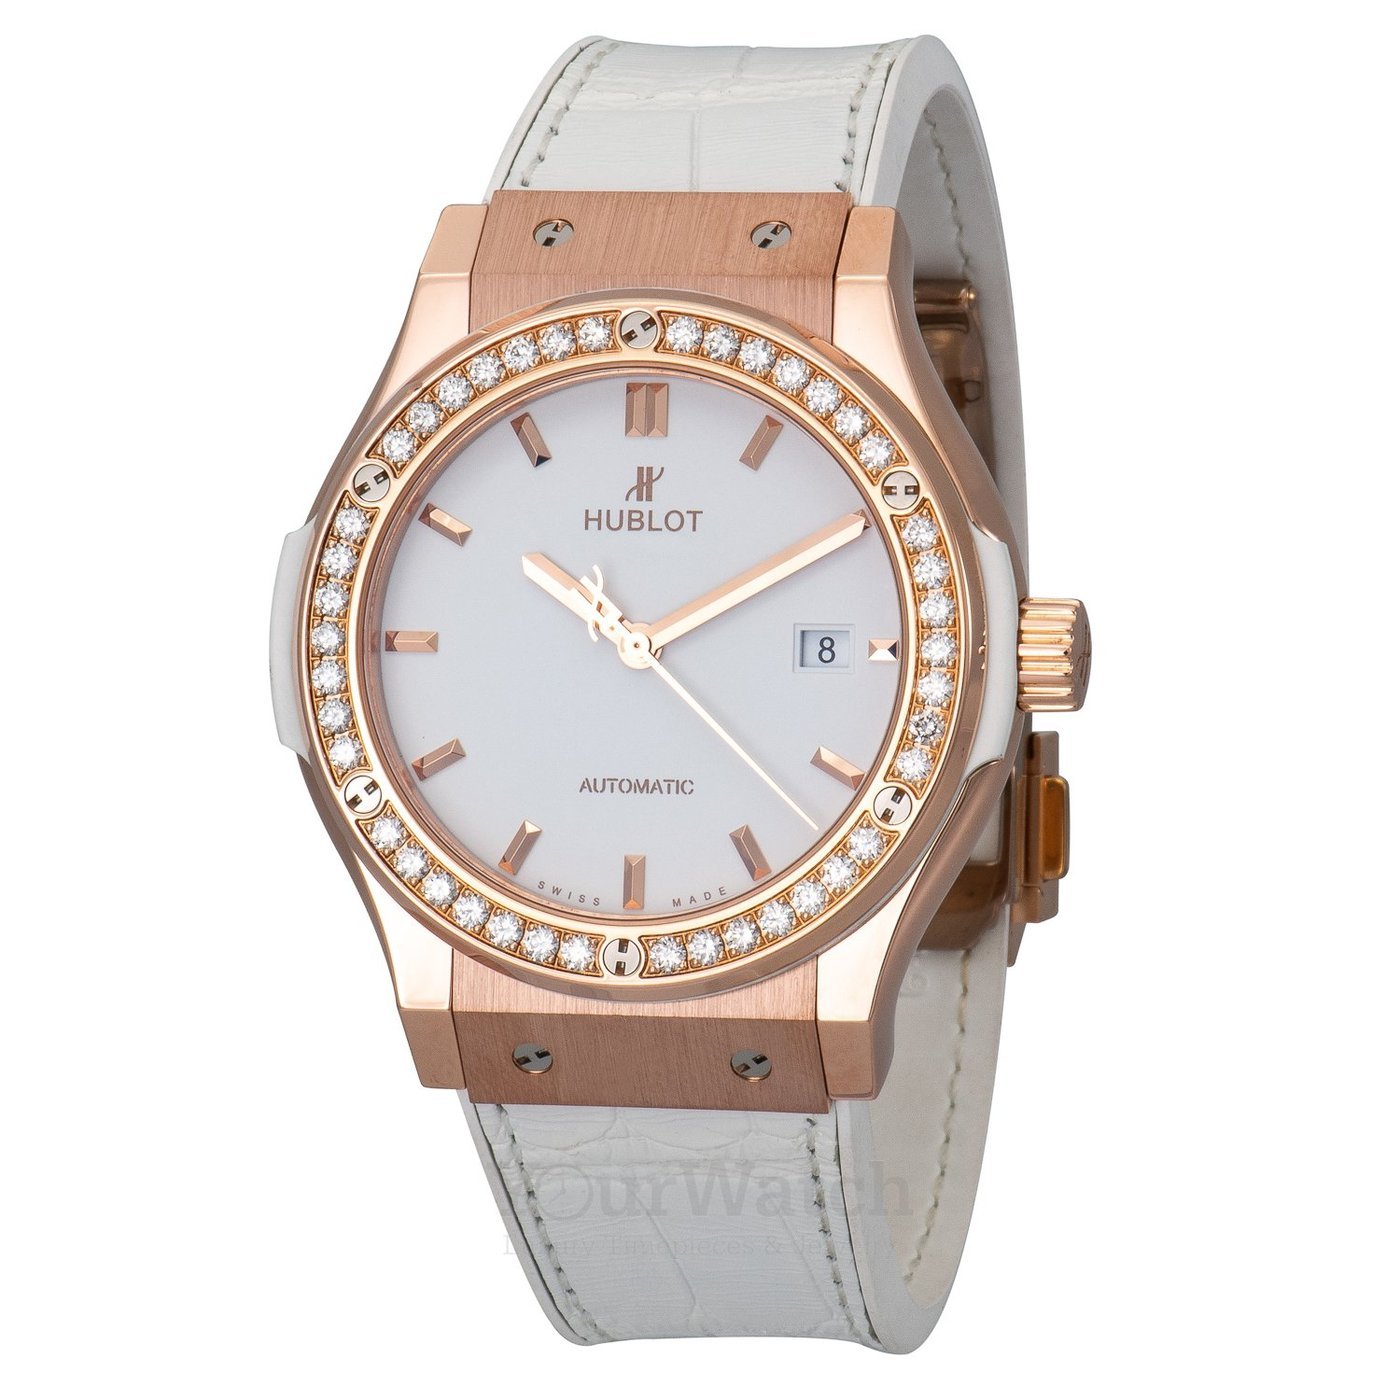 Hublot-Classic-Fusion-Automatic-42mm-Ladies-Watch-542OE2080LR1204-Yourwatch